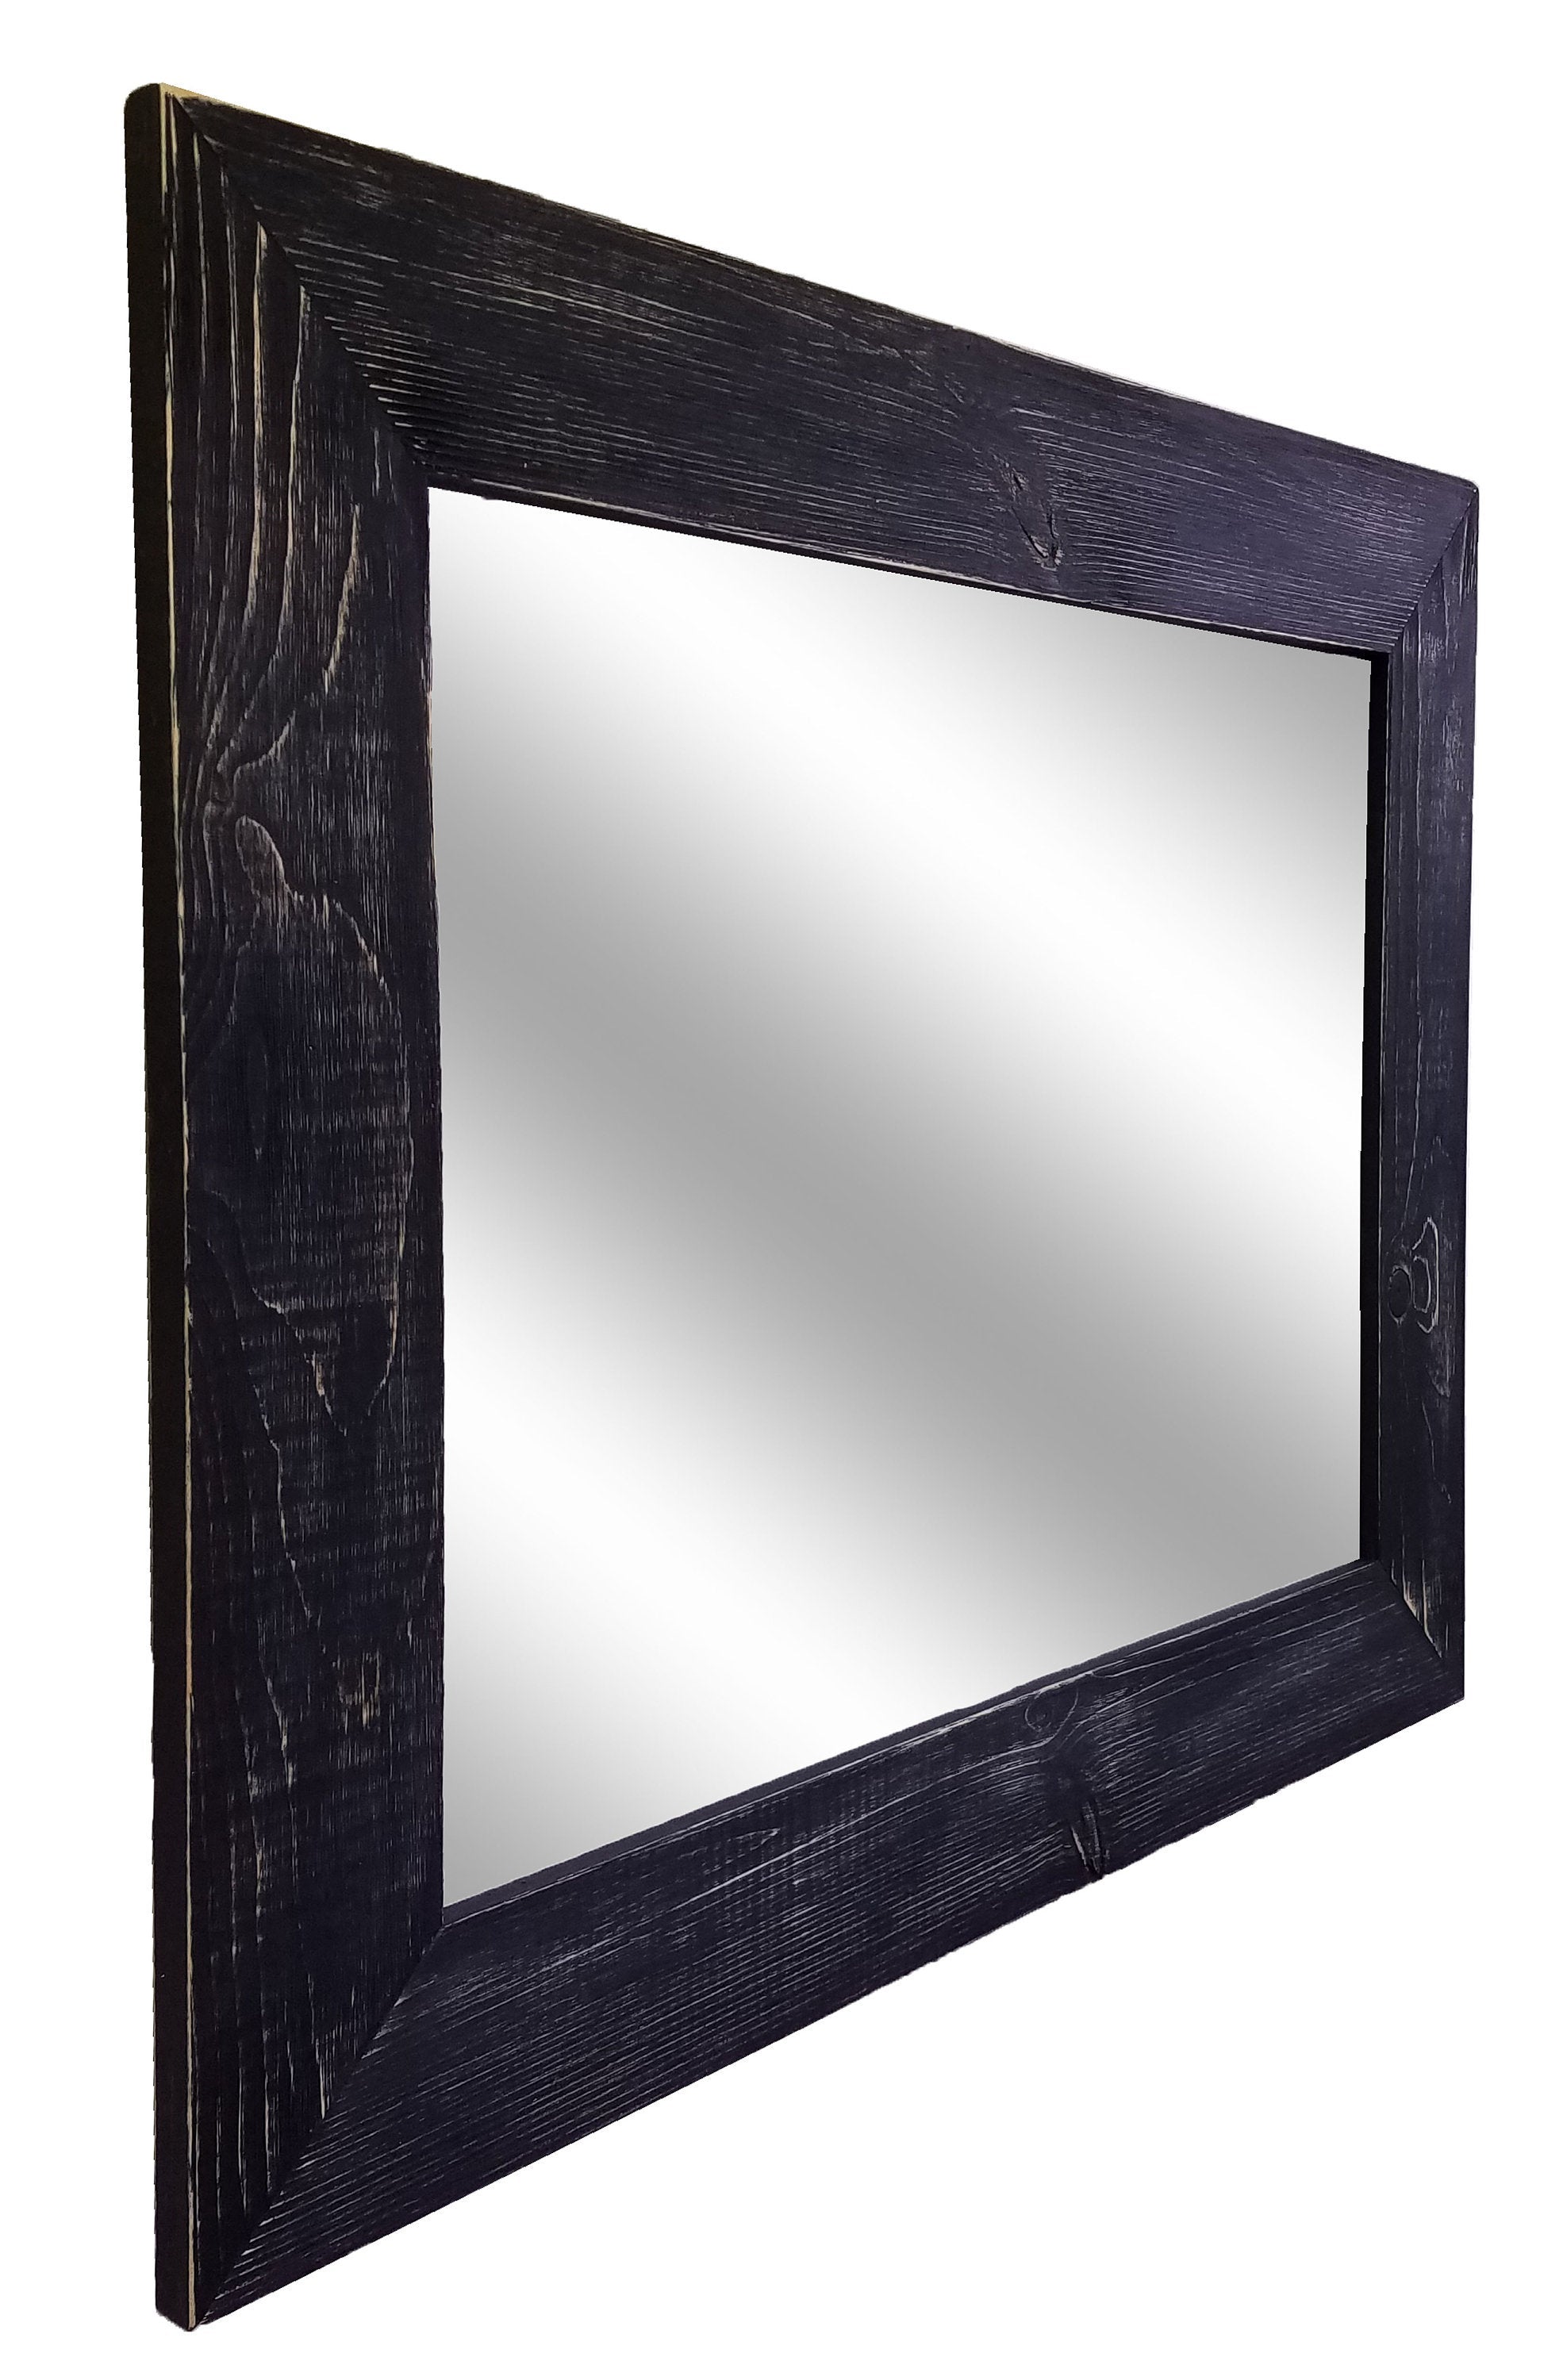 Shiplap Rustic Framed Wall Mirror, 20 Paint Colors, Shown in Kettle Black, Handmade in the USA